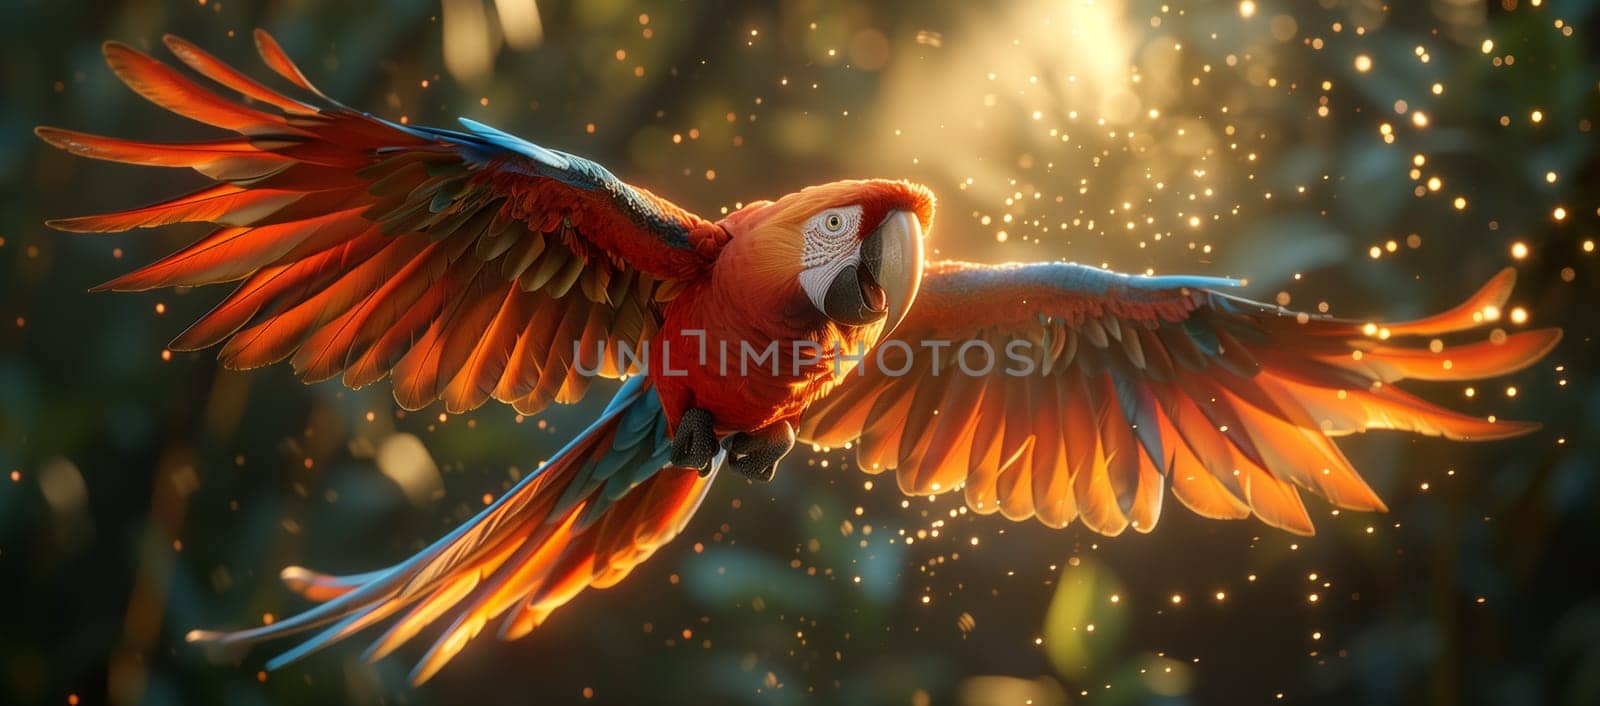 A parrot with colorful feathers is soaring through the air, its wings spread wide. This event showcases the beautiful wildlife of terrestrial animals like the parrot